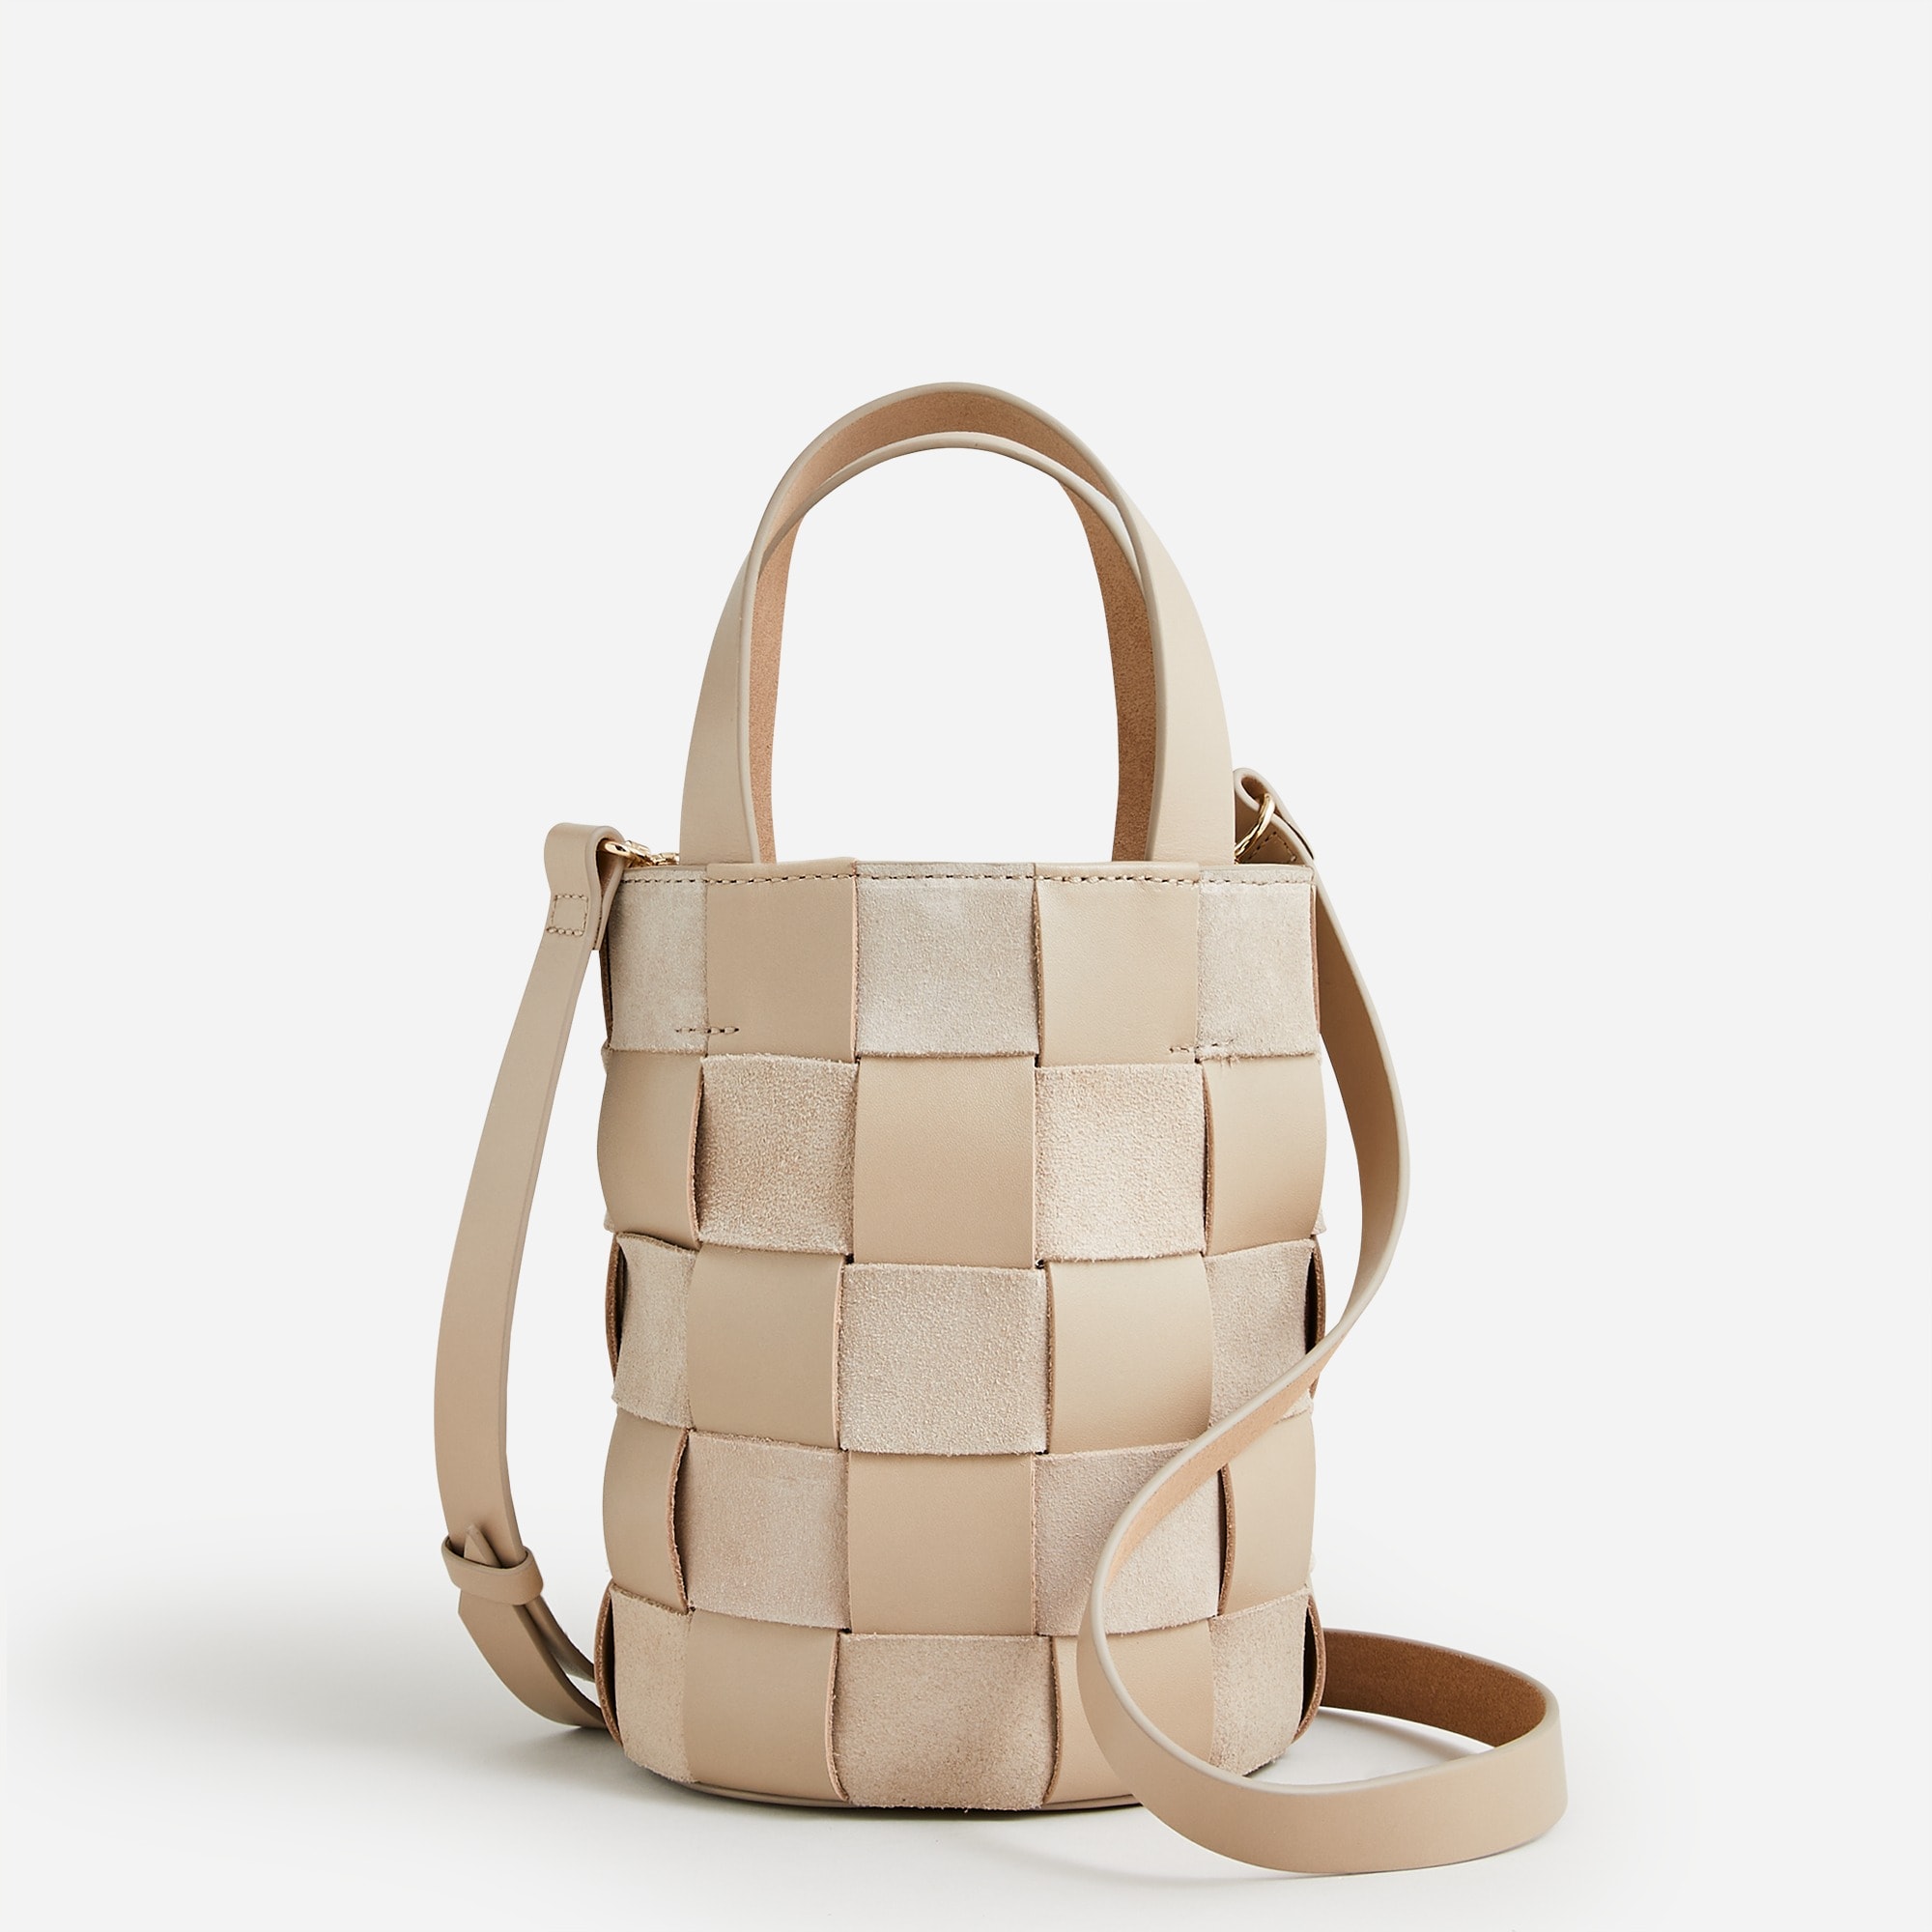 J.Crew: Woven Bucket Bag In Leather And Suede For Women